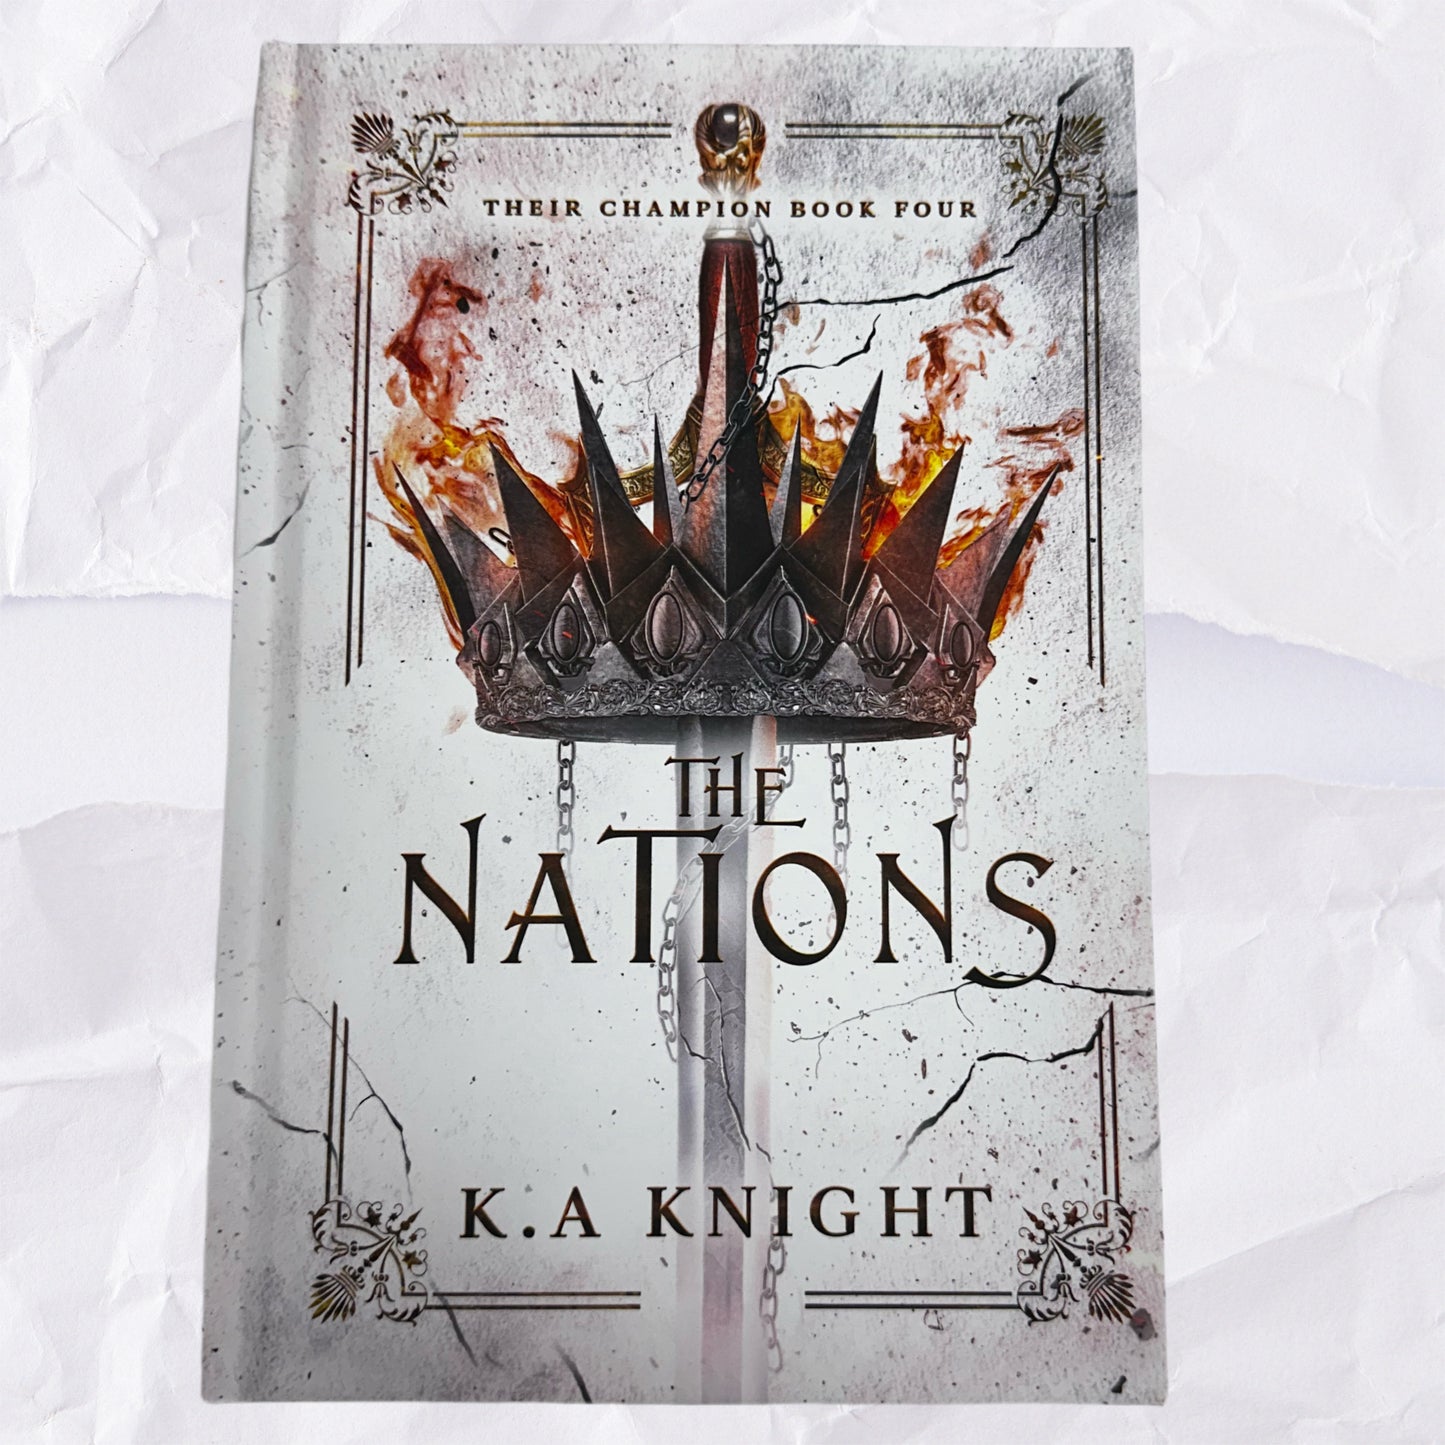 The Nations (Their Champion #4) by K.A Knight